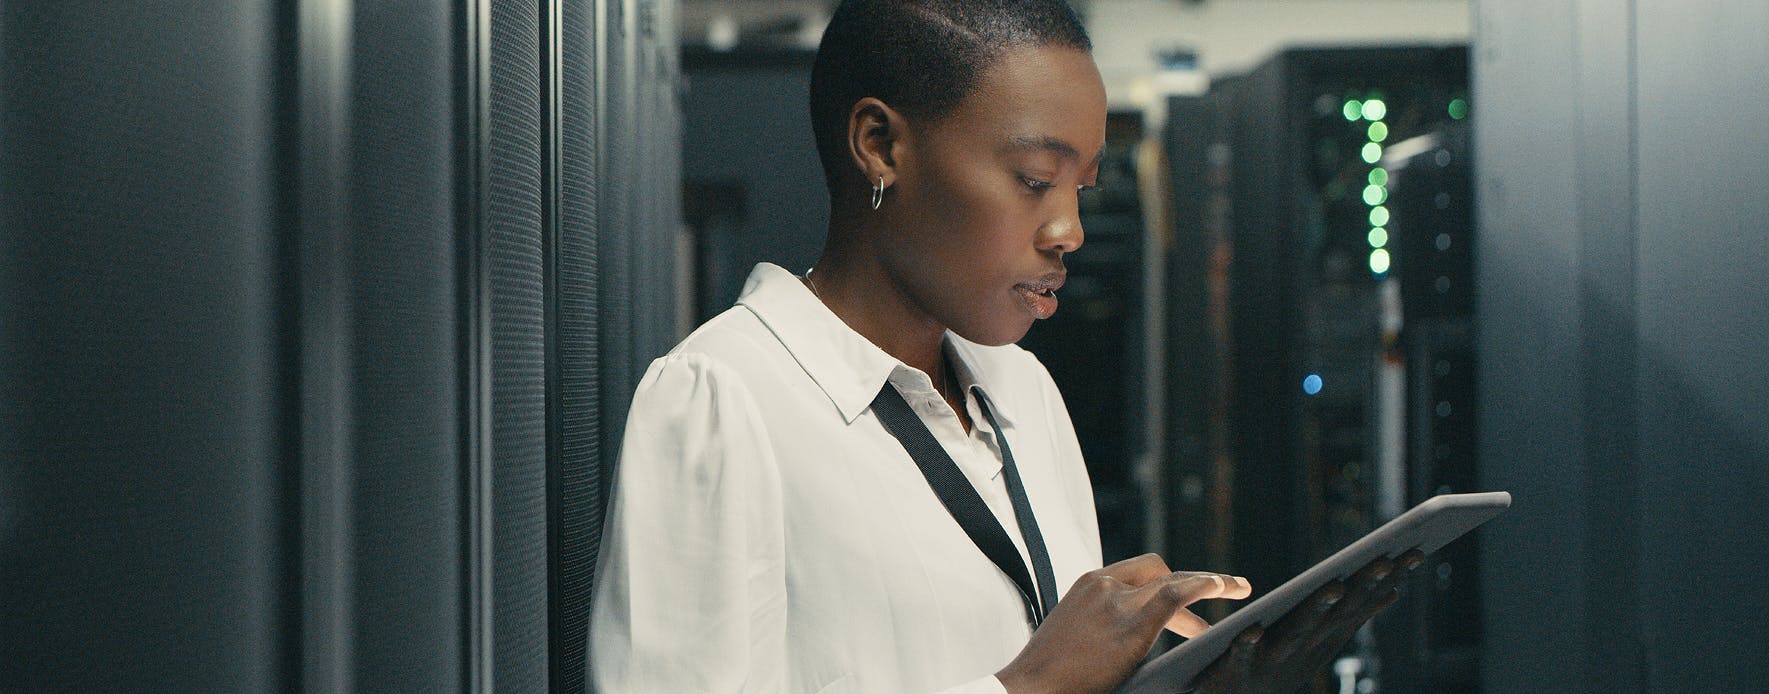 Image shows a black woman checking a tablet with servers in the background. Related to cyber engineering, cyber warfare engineer, cyber operations officer